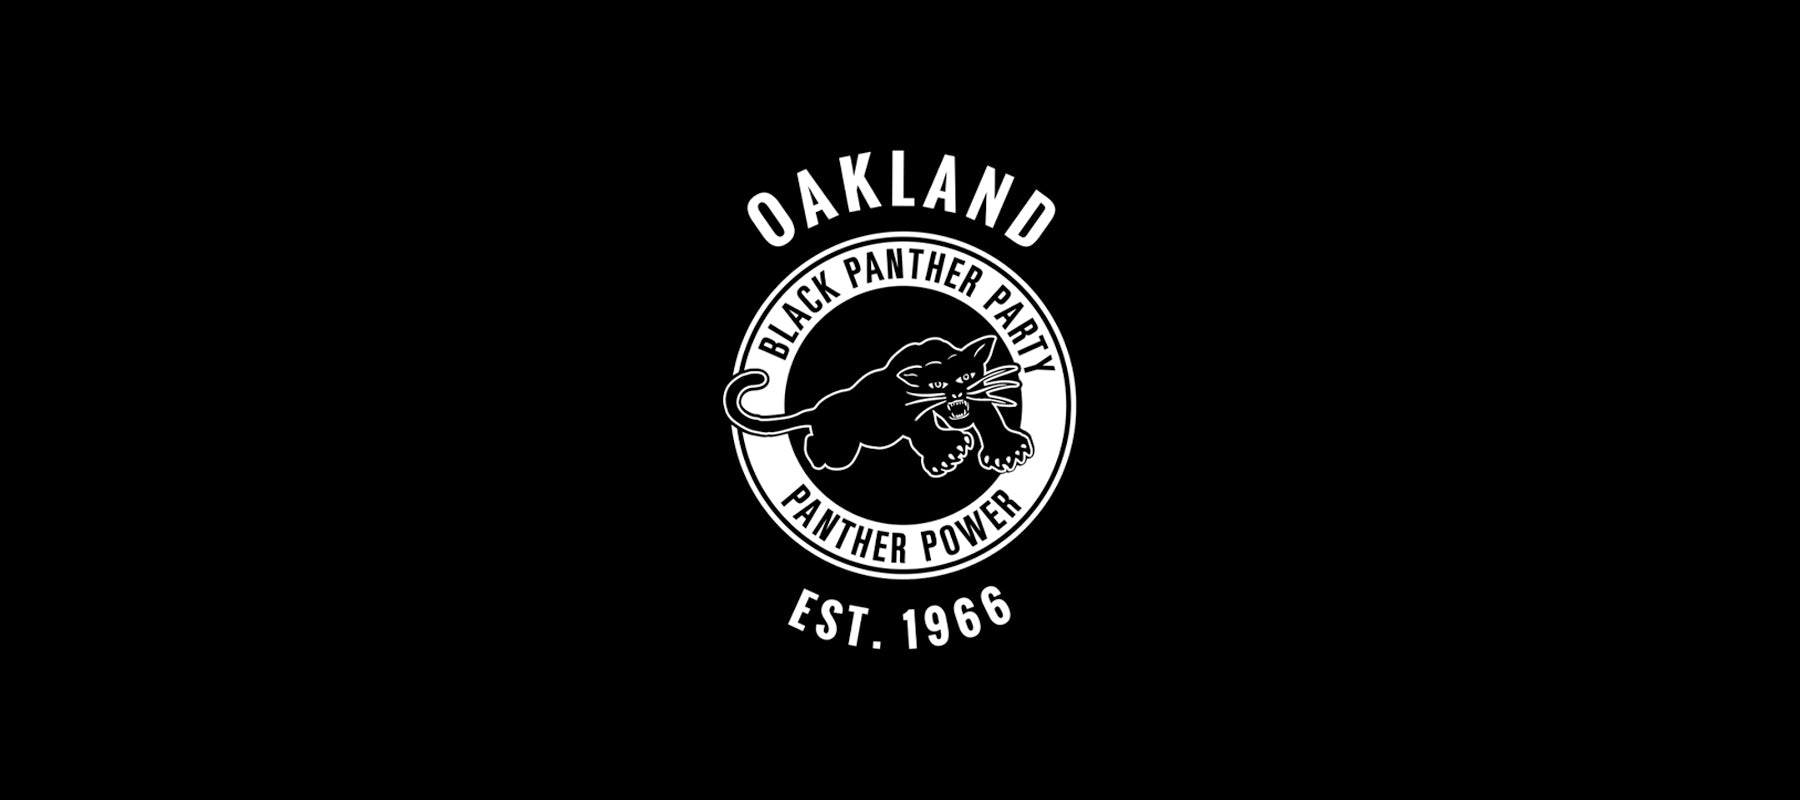 Black Panther Party Alumni Legacy Network logo in white on a black background, text reads Oakland EST. 1966 Black Panther Party Panther Power and includes a line drawing of a panther inside of a circle.